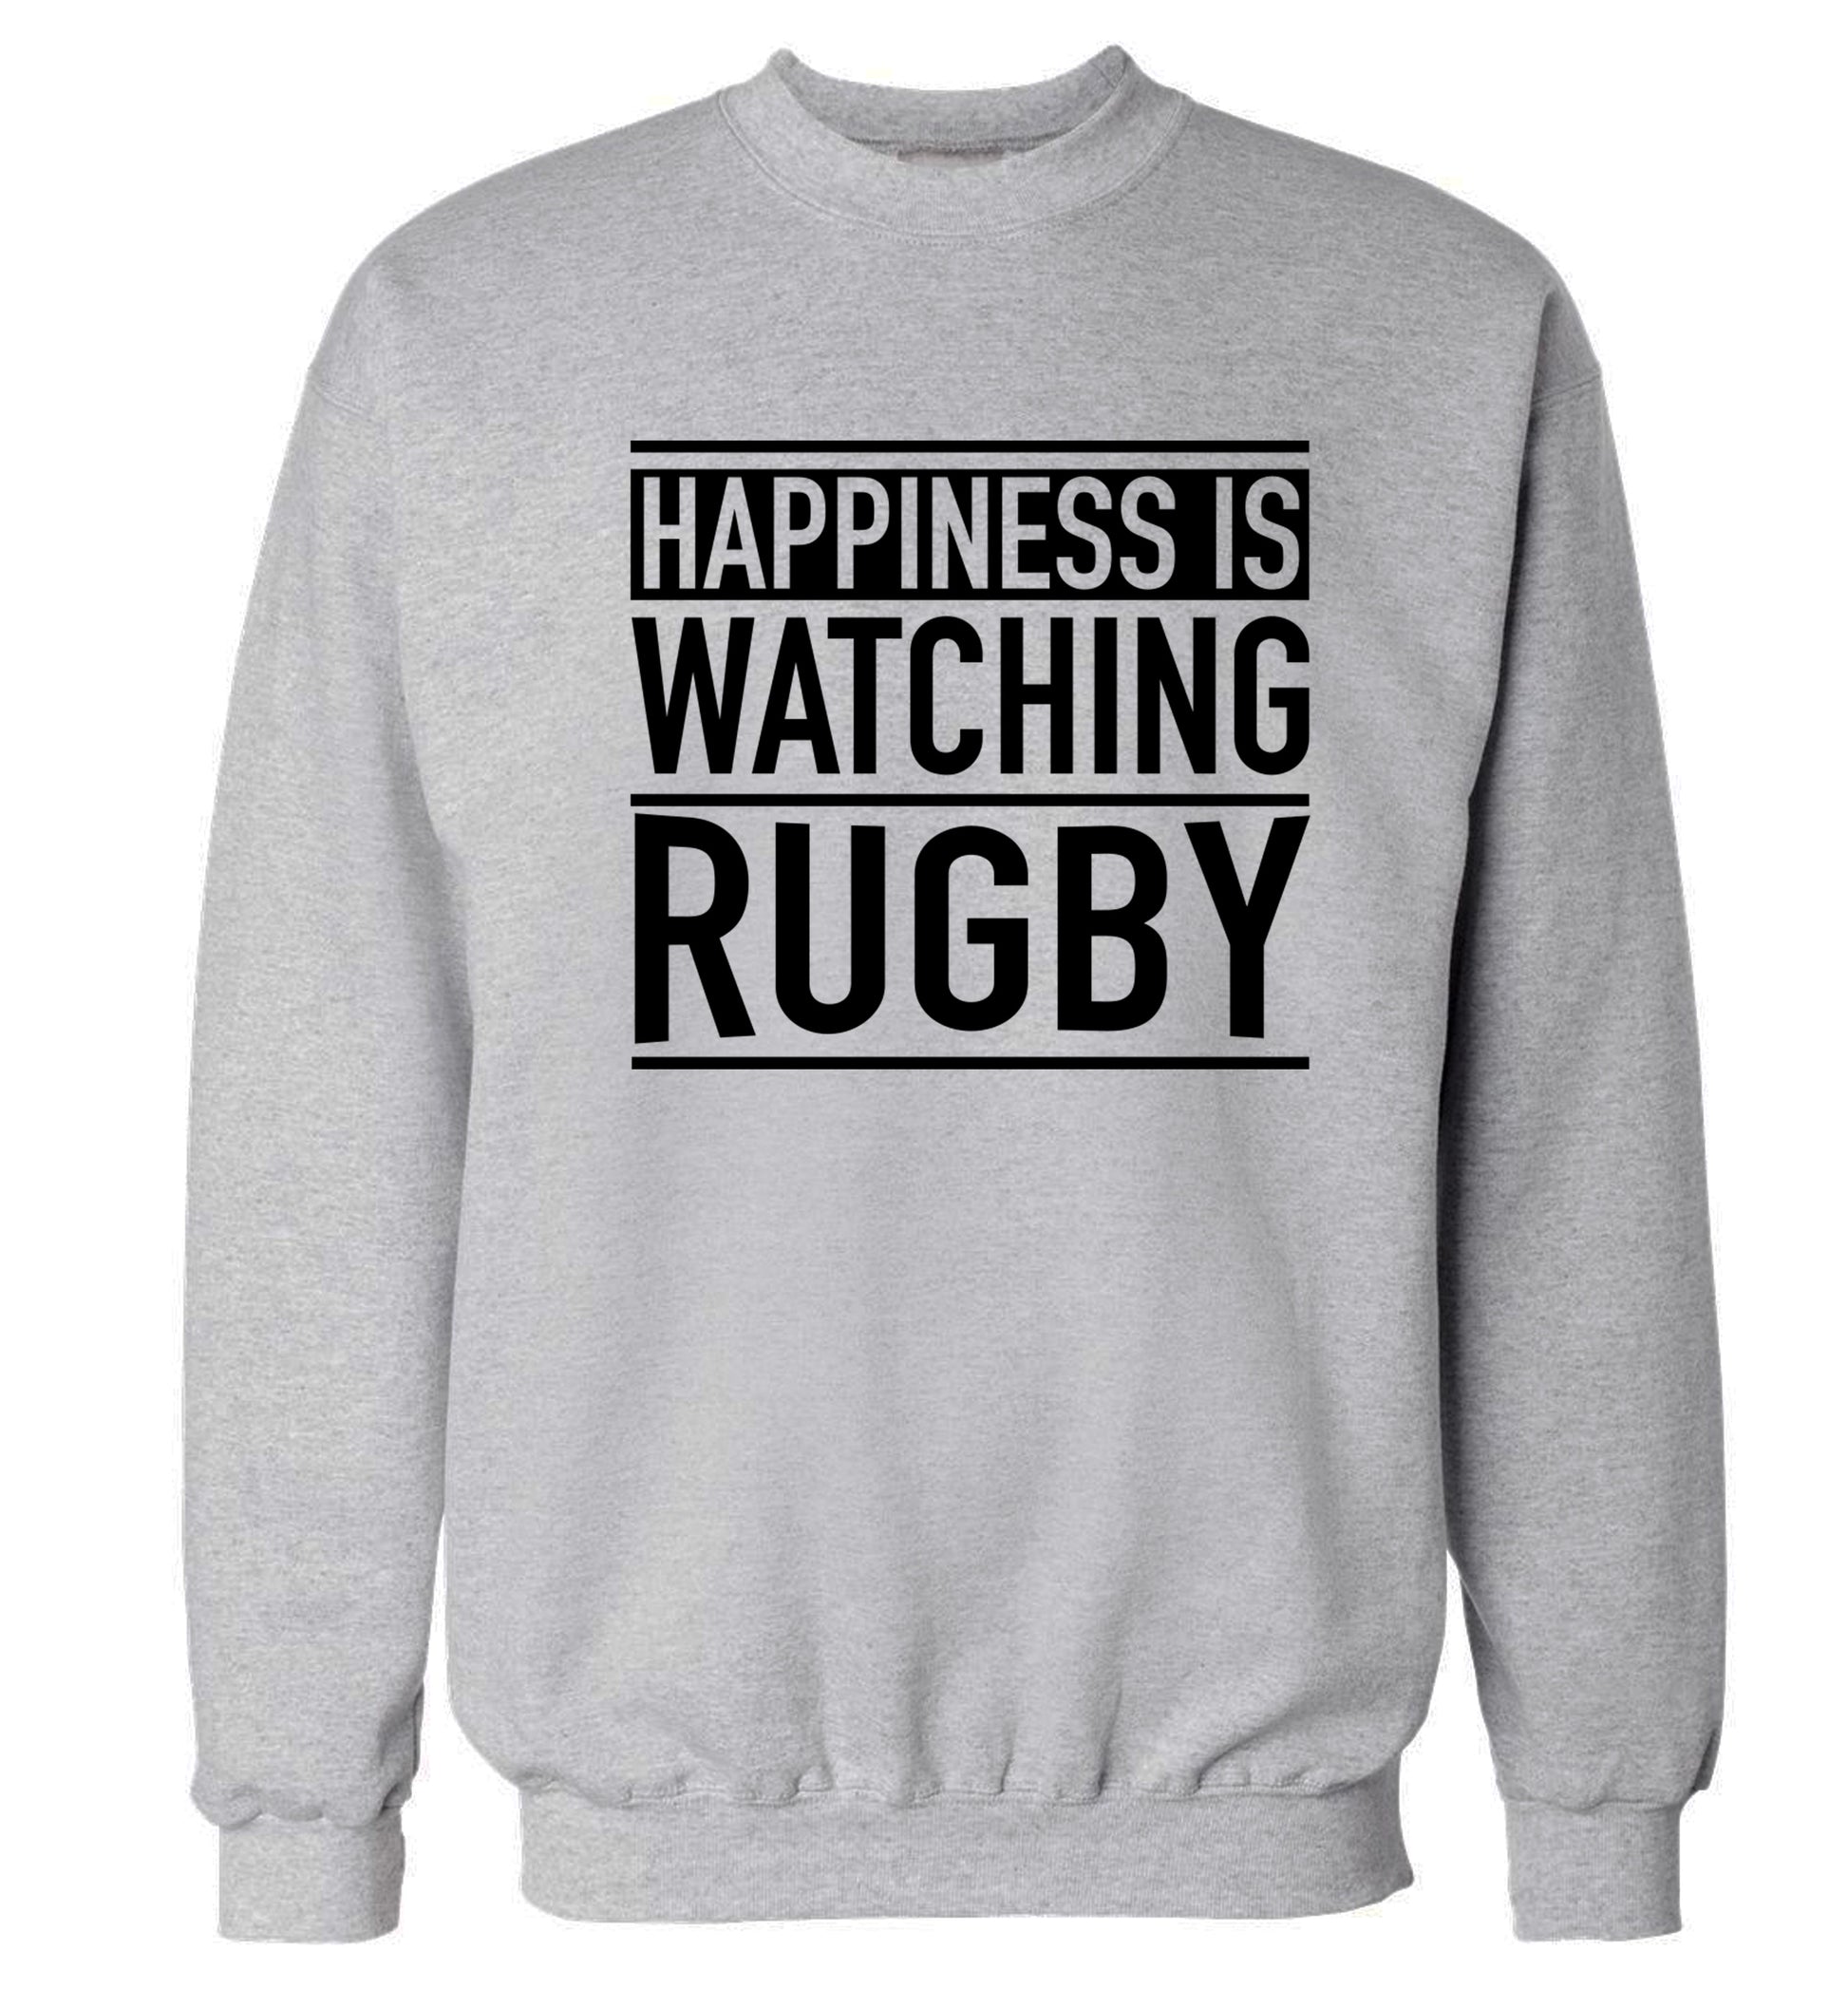 Happiness is watching rugby Adult's unisex grey Sweater 2XL